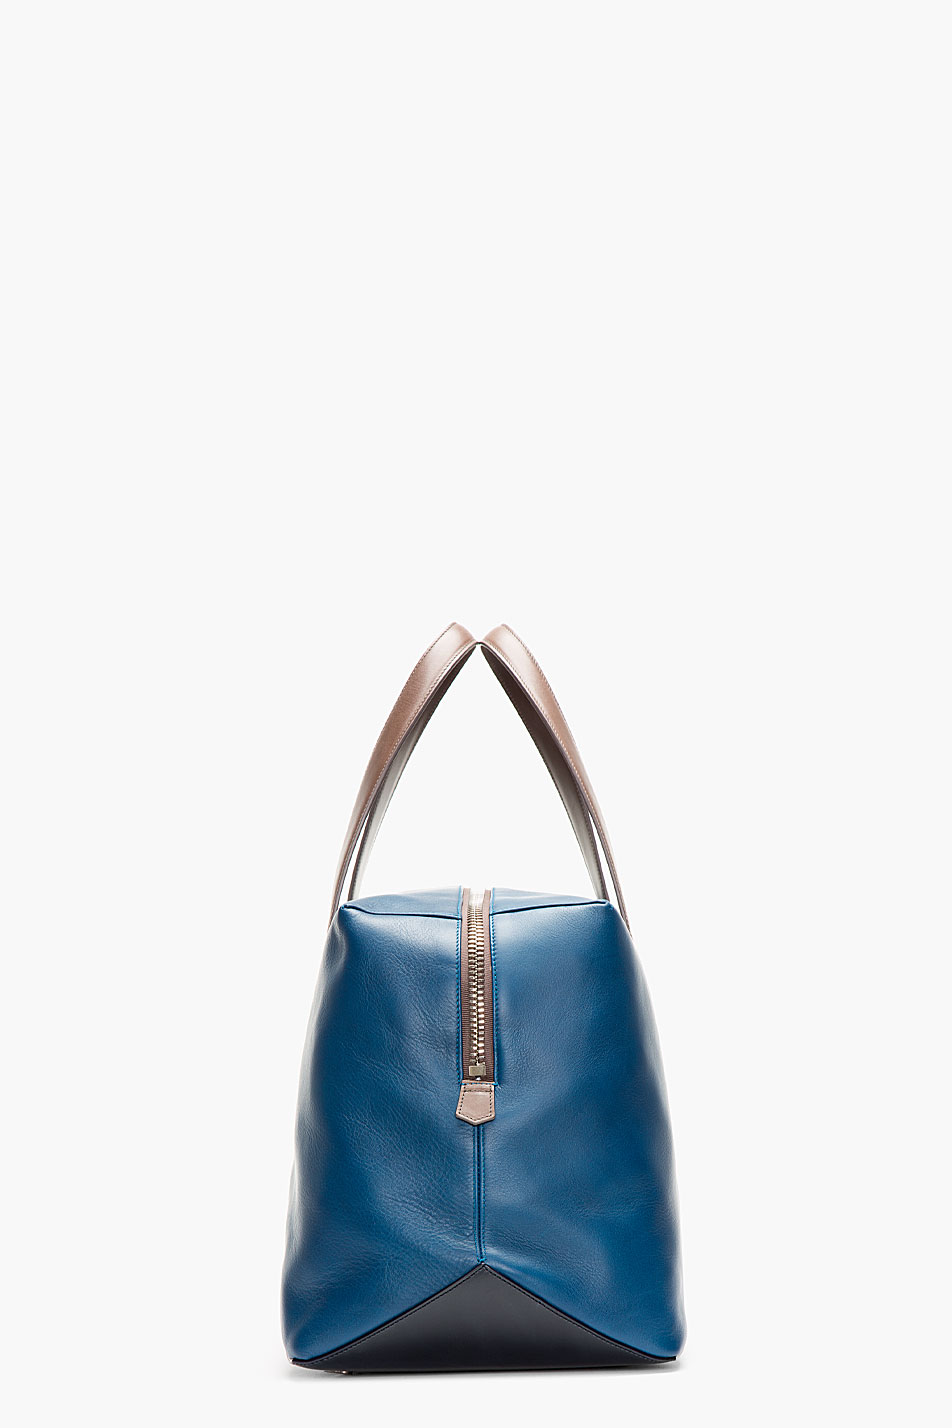 Paul smith Deep Blue Leather Duffle Bag in Blue for Men | Lyst